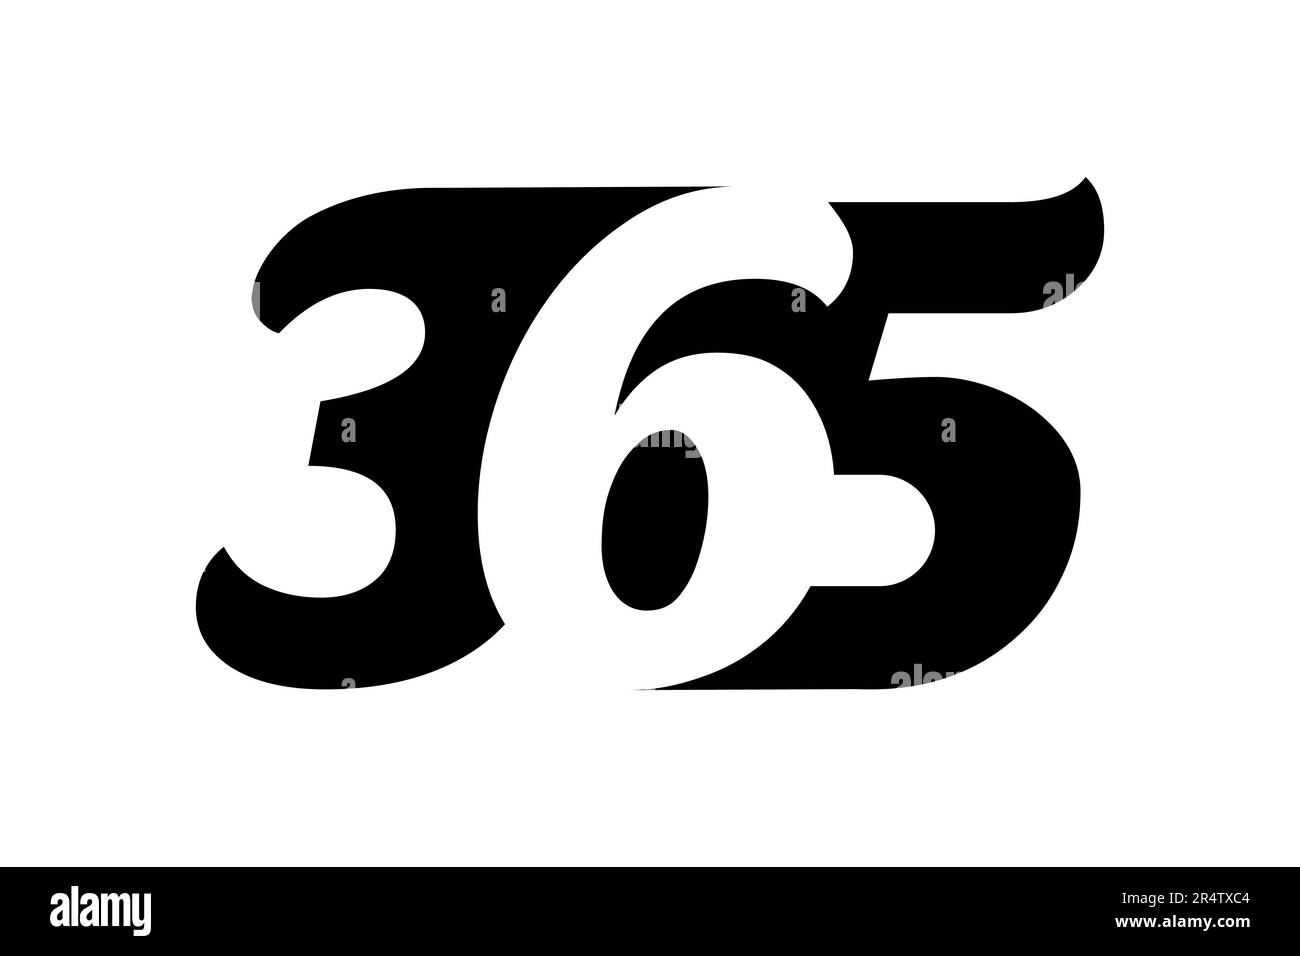 365 logo on white background. Black text with negative space effect. Every day in a year sign. Numbers three six five. Infinity symbol. Vector. Stock Vector